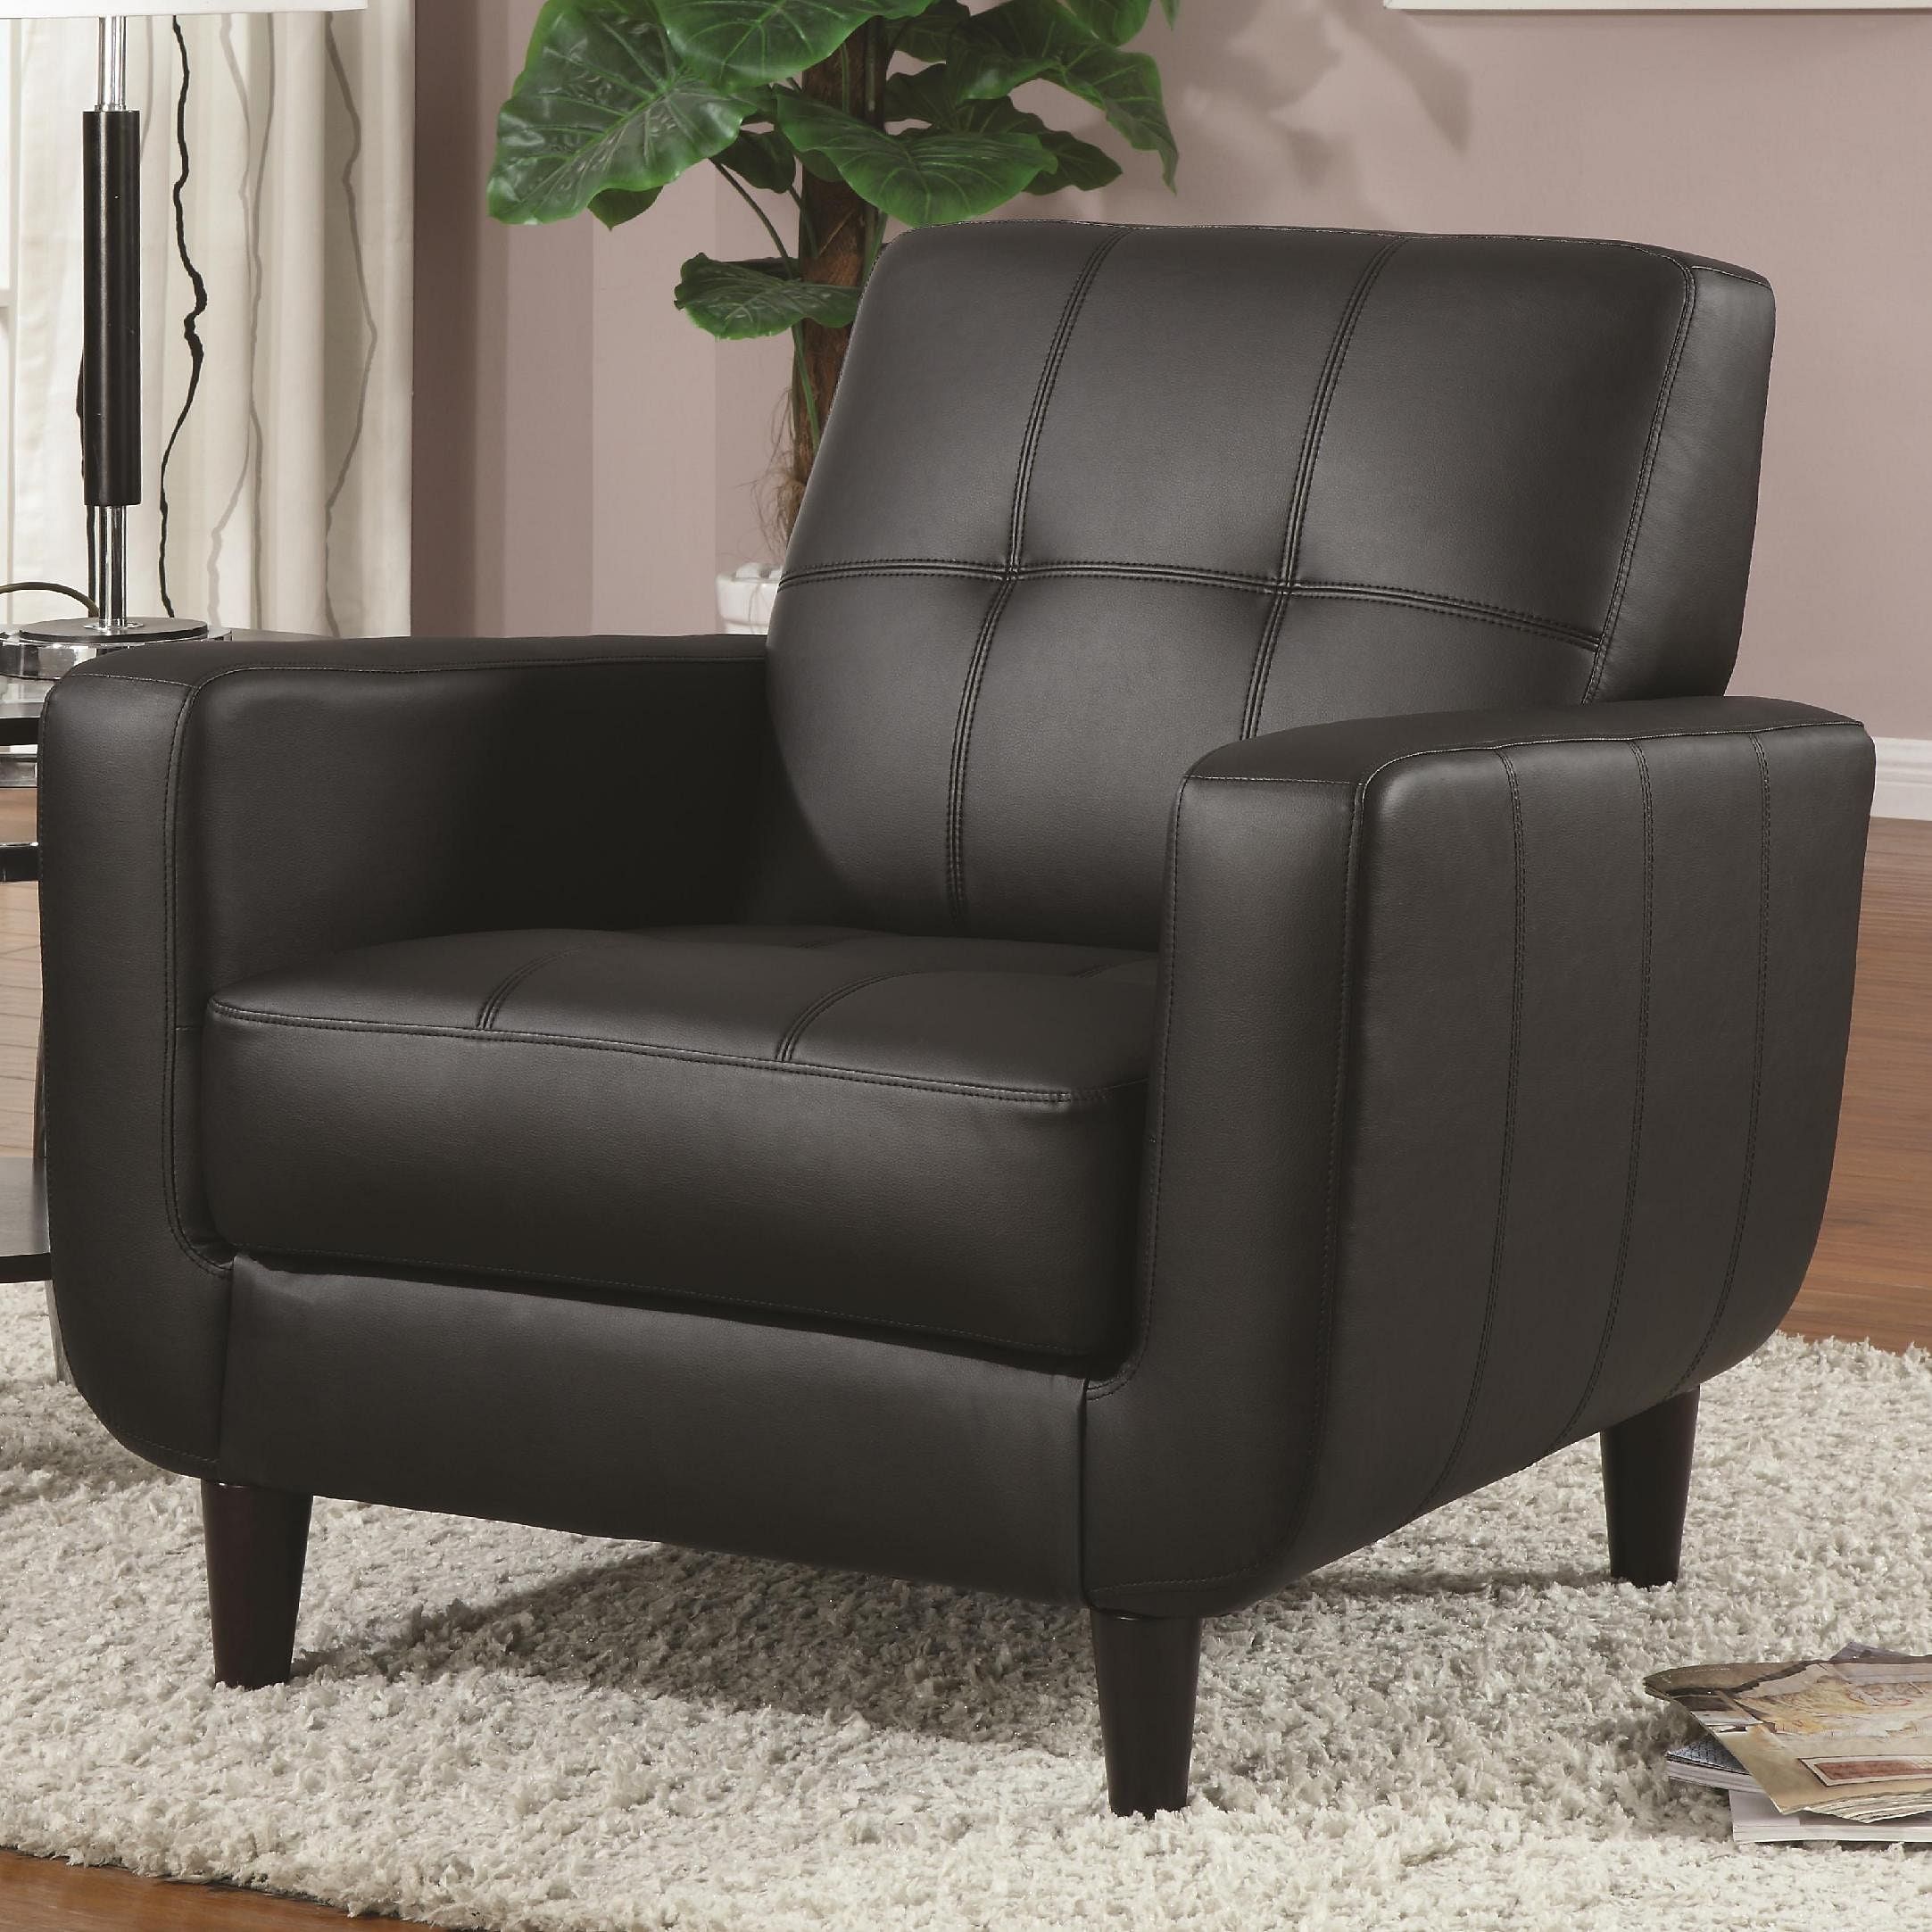 Klingon Callie Accent Chair - Online Furniture Shopping for Accent Chairs -  Free Delivery X India - SULFUR.one